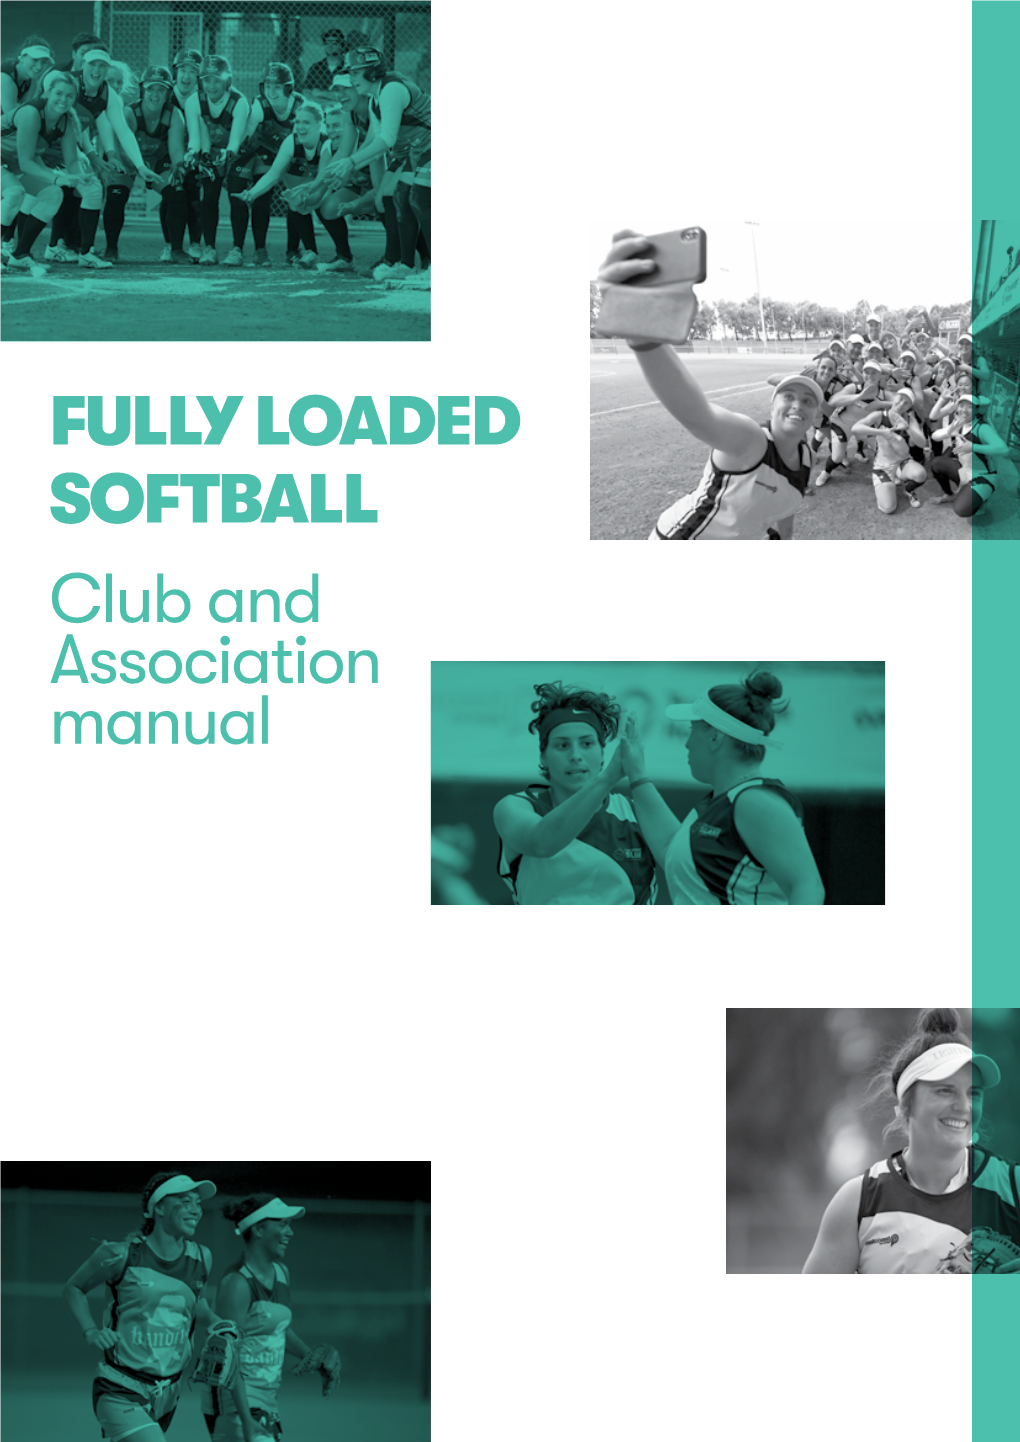 FULLY LOADED SOFTBALL Club and Association Manual Fully Loaded Softball — Club and Association Manual 2/14